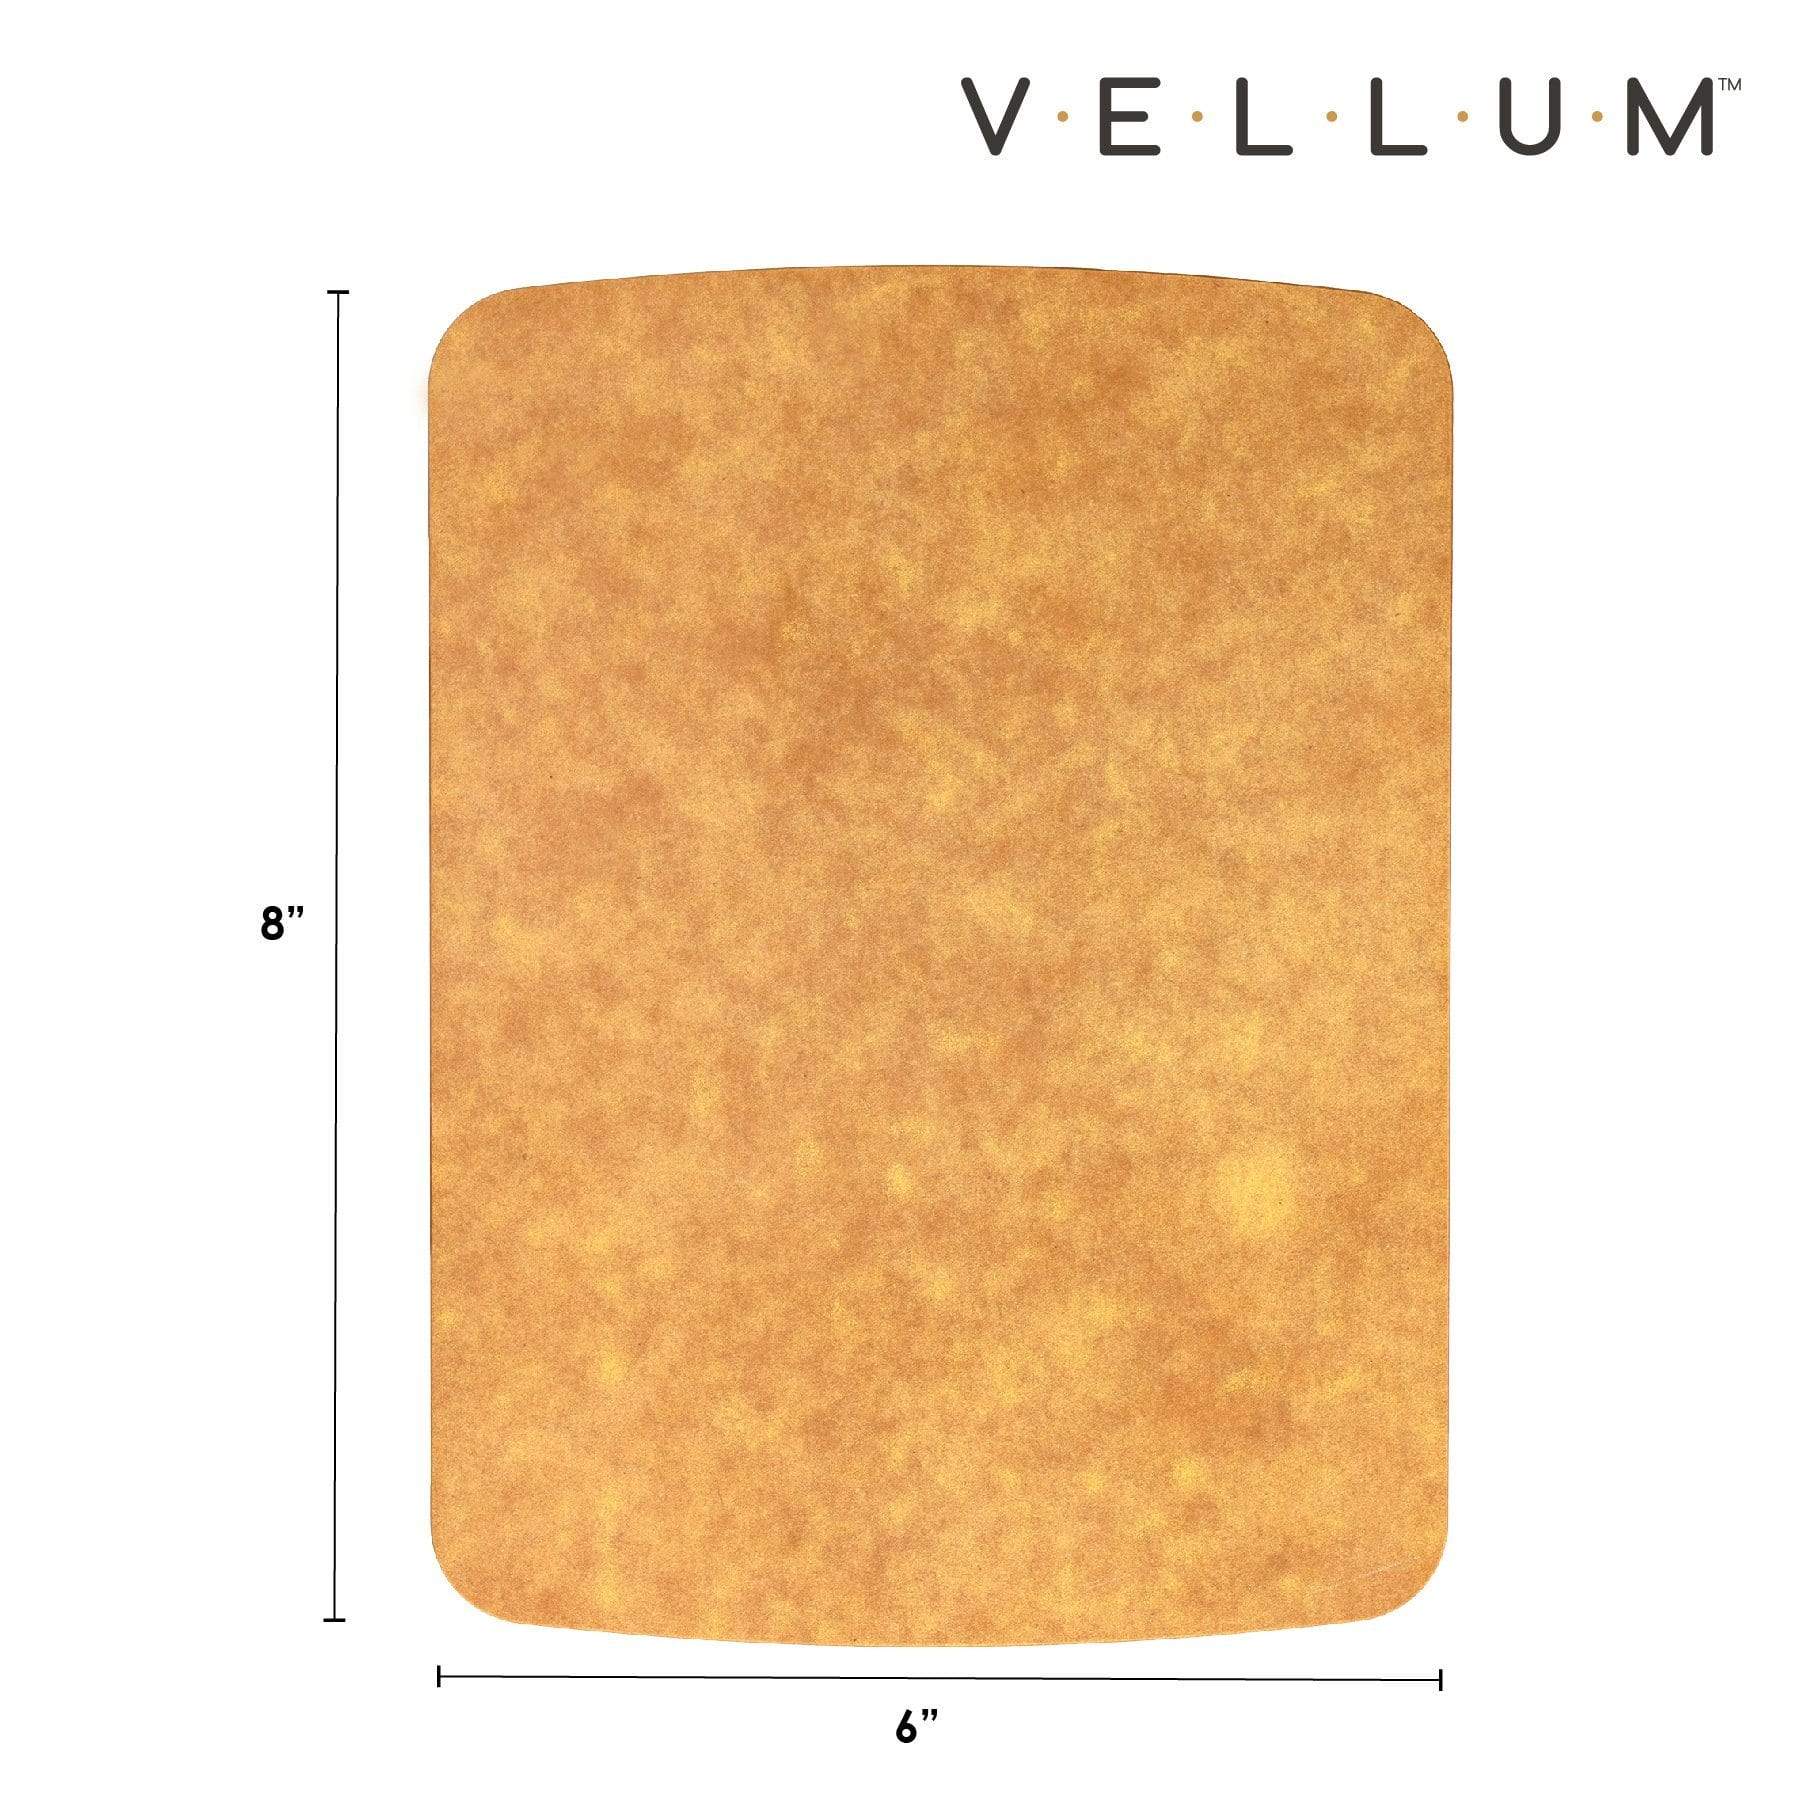 Totally Bamboo Vellum™ Wood Paper Composite Cutting Board, 8" x 6" | Dishwasher Safe